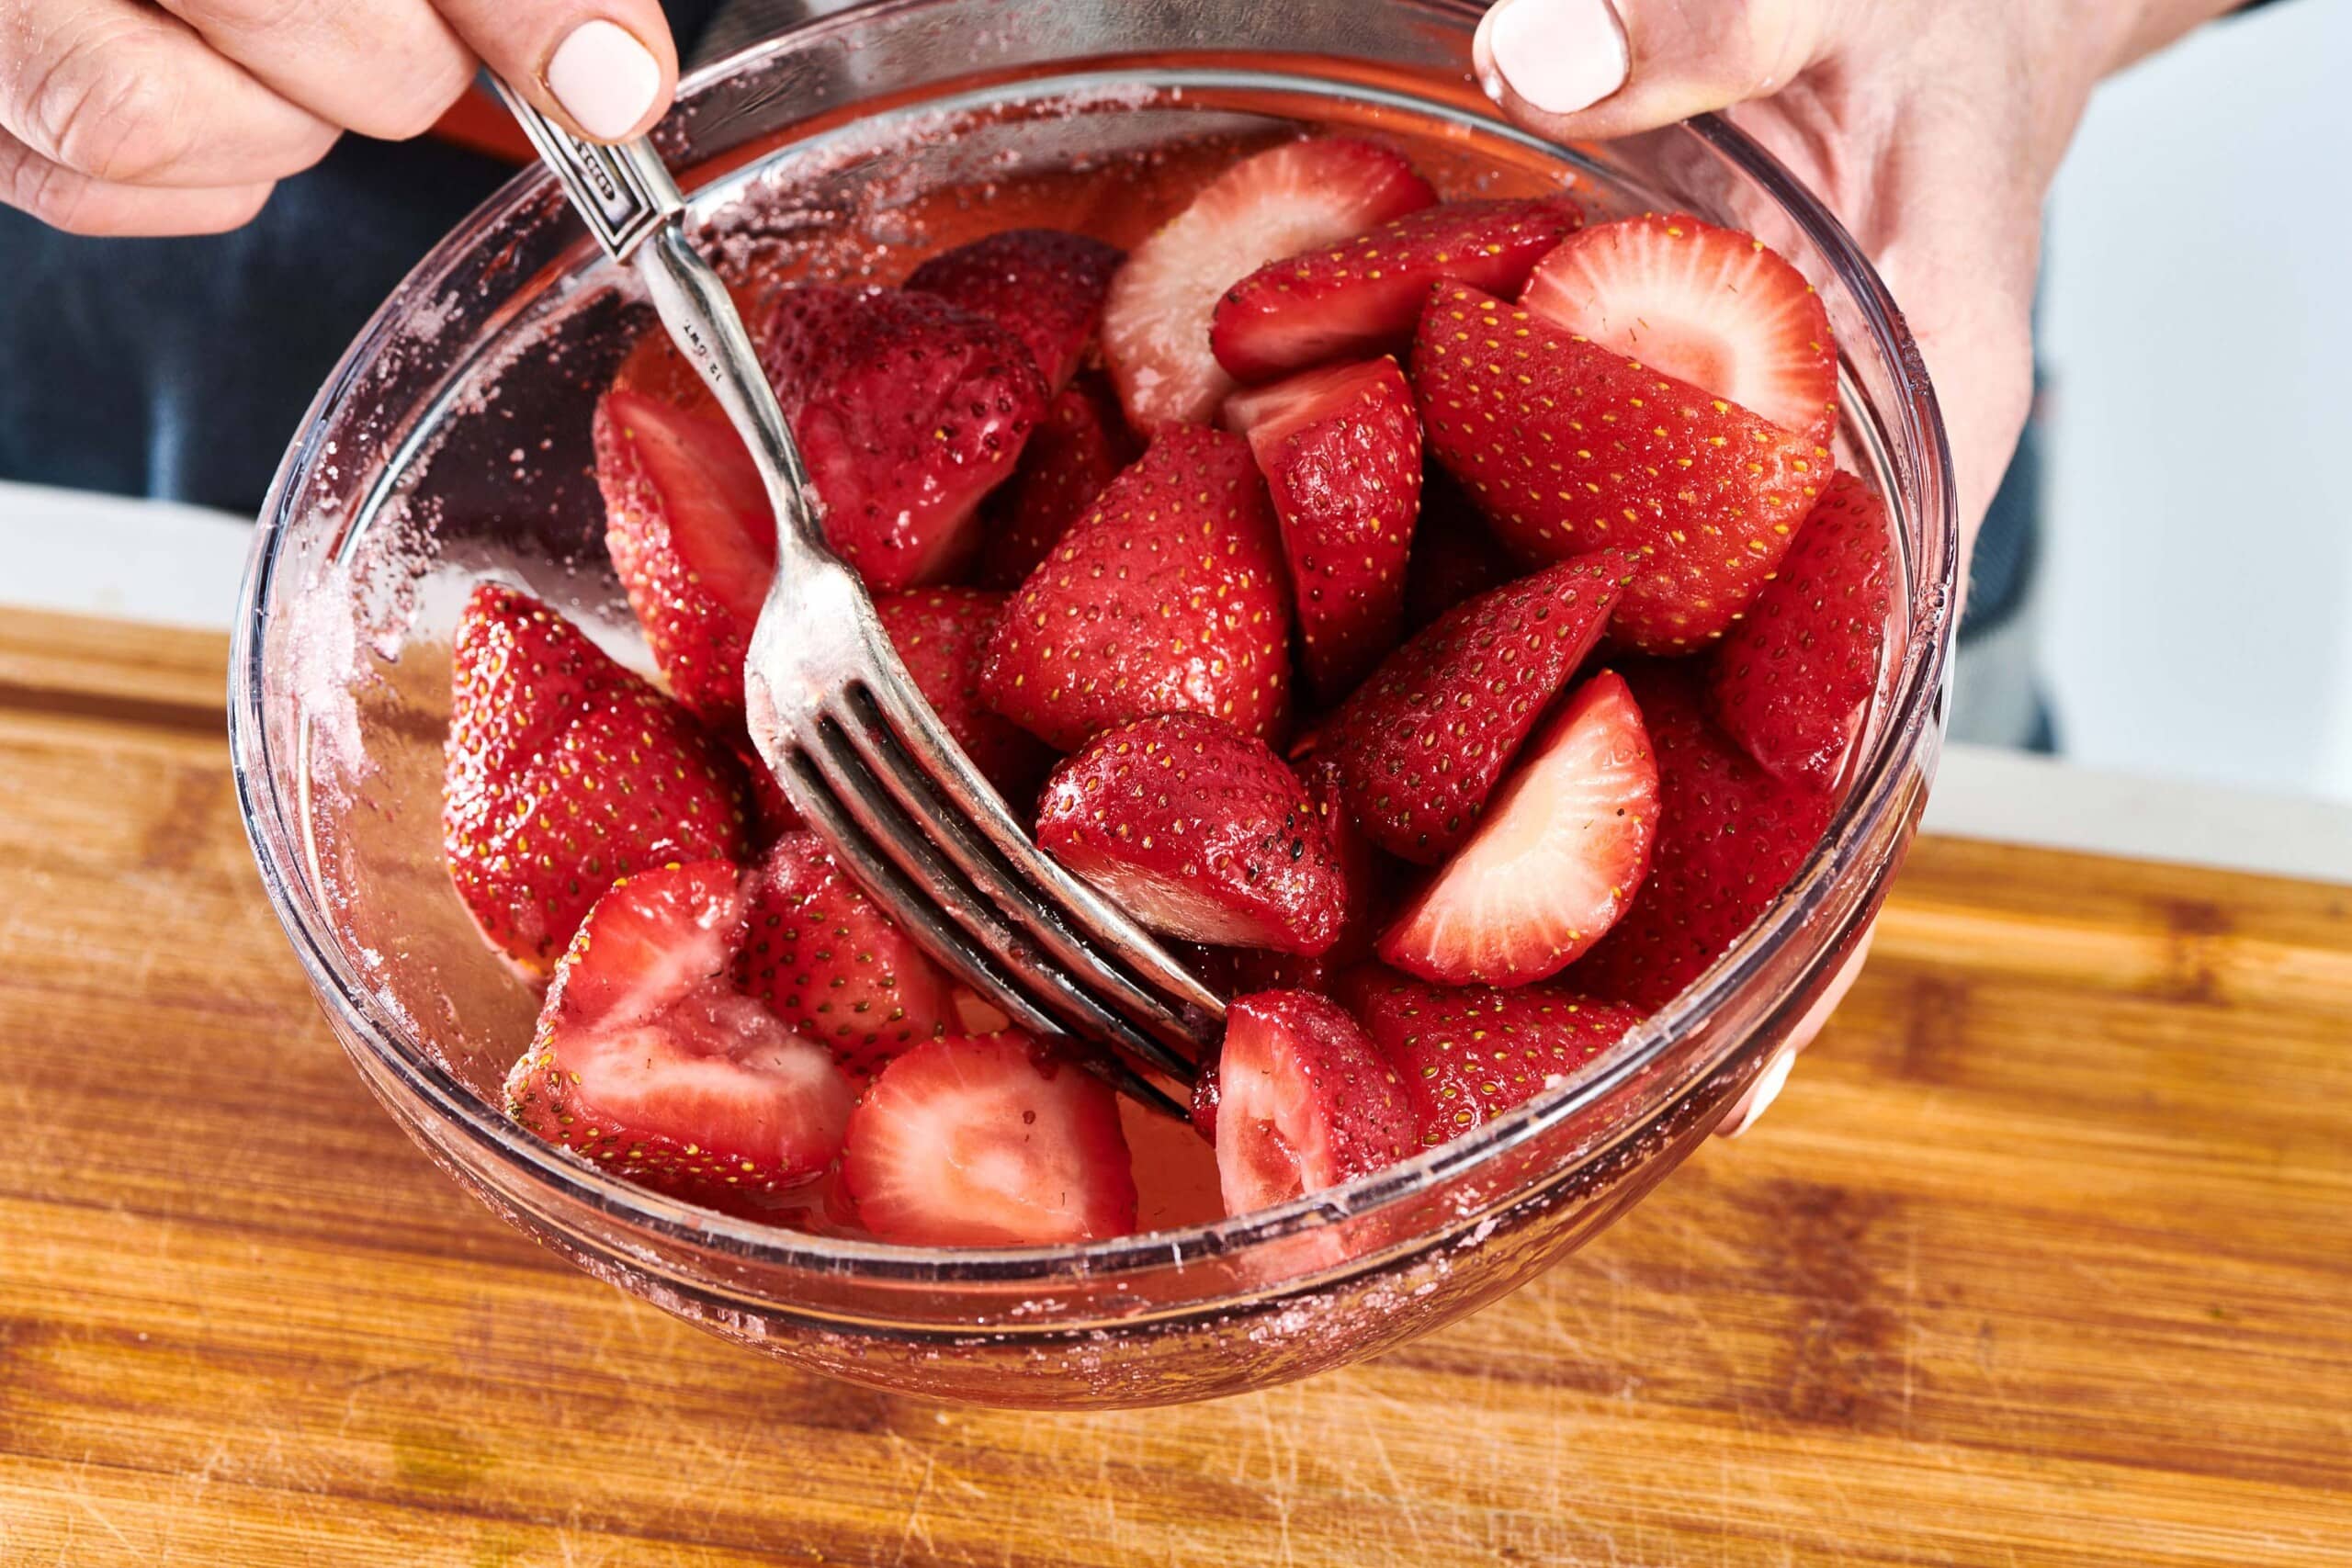 Macerated strawberries in bowl.